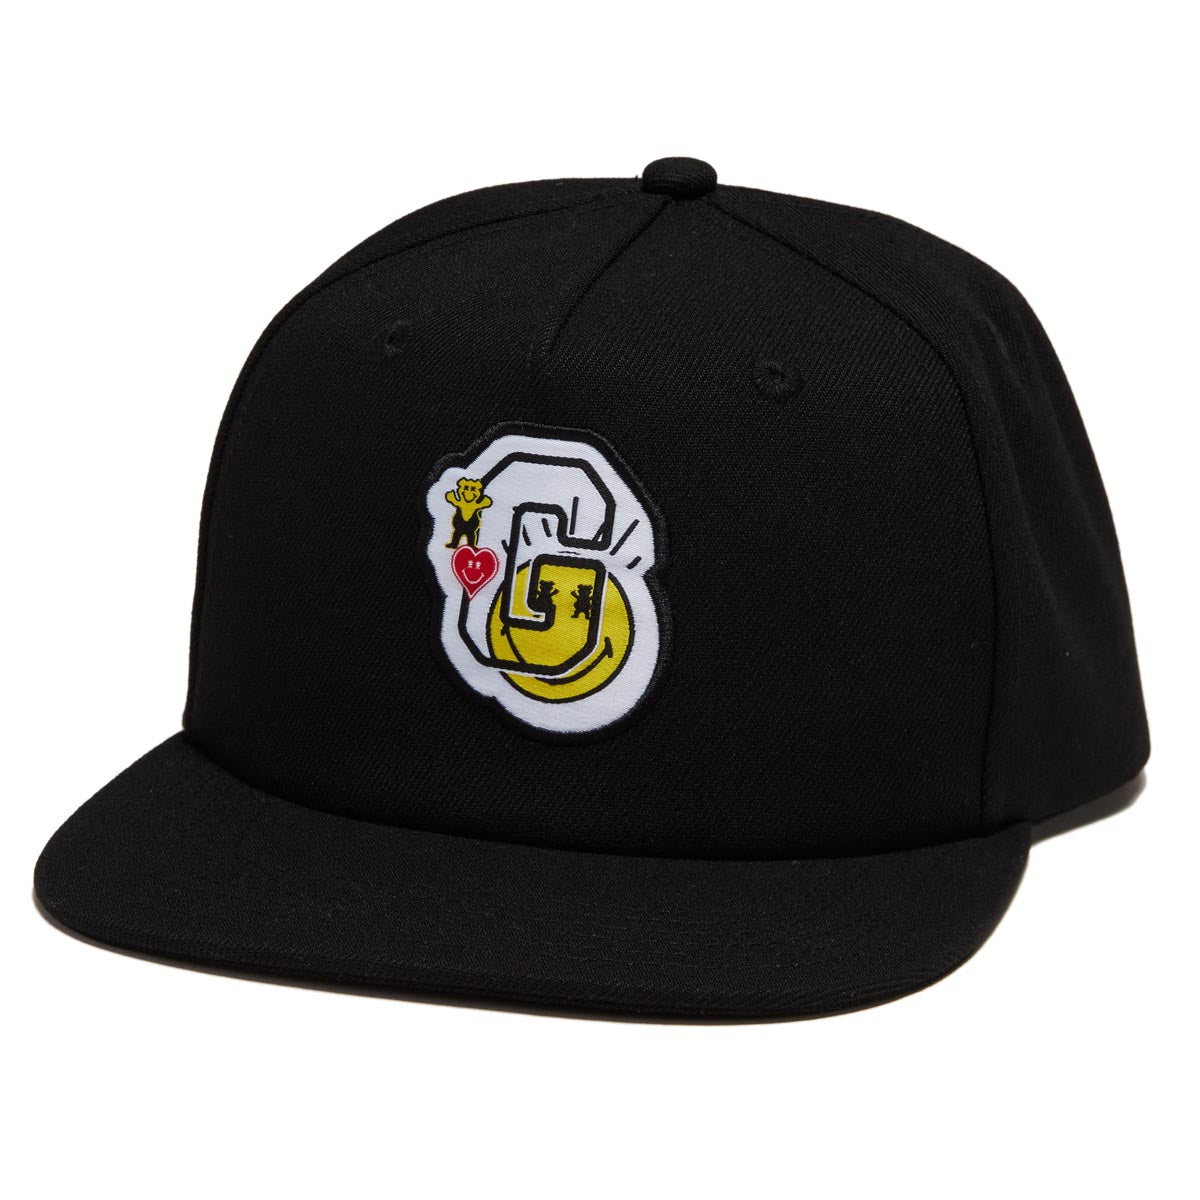 Grizzly x Smiley World Snapback Hat - Black image 1